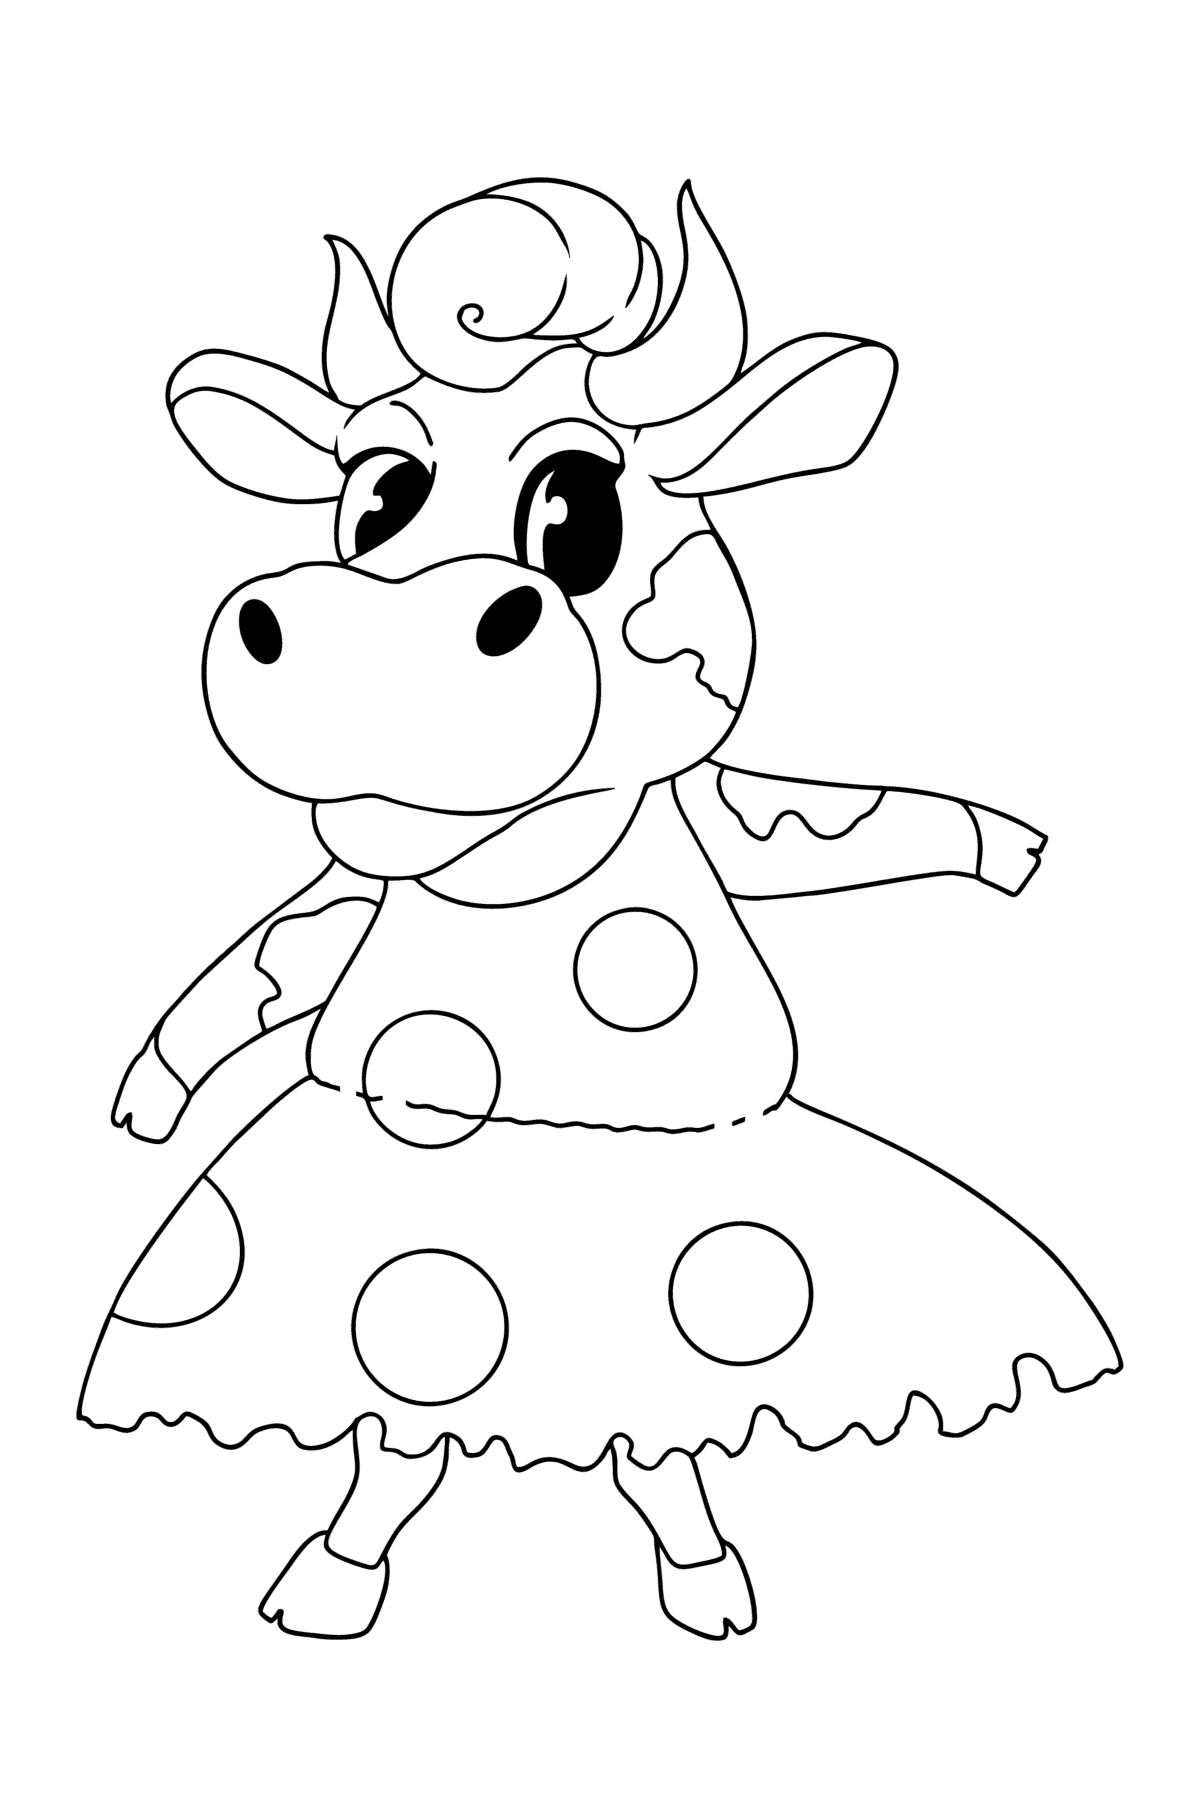 Kawaii cow standing up coloring page - Coloring Pages for Kids